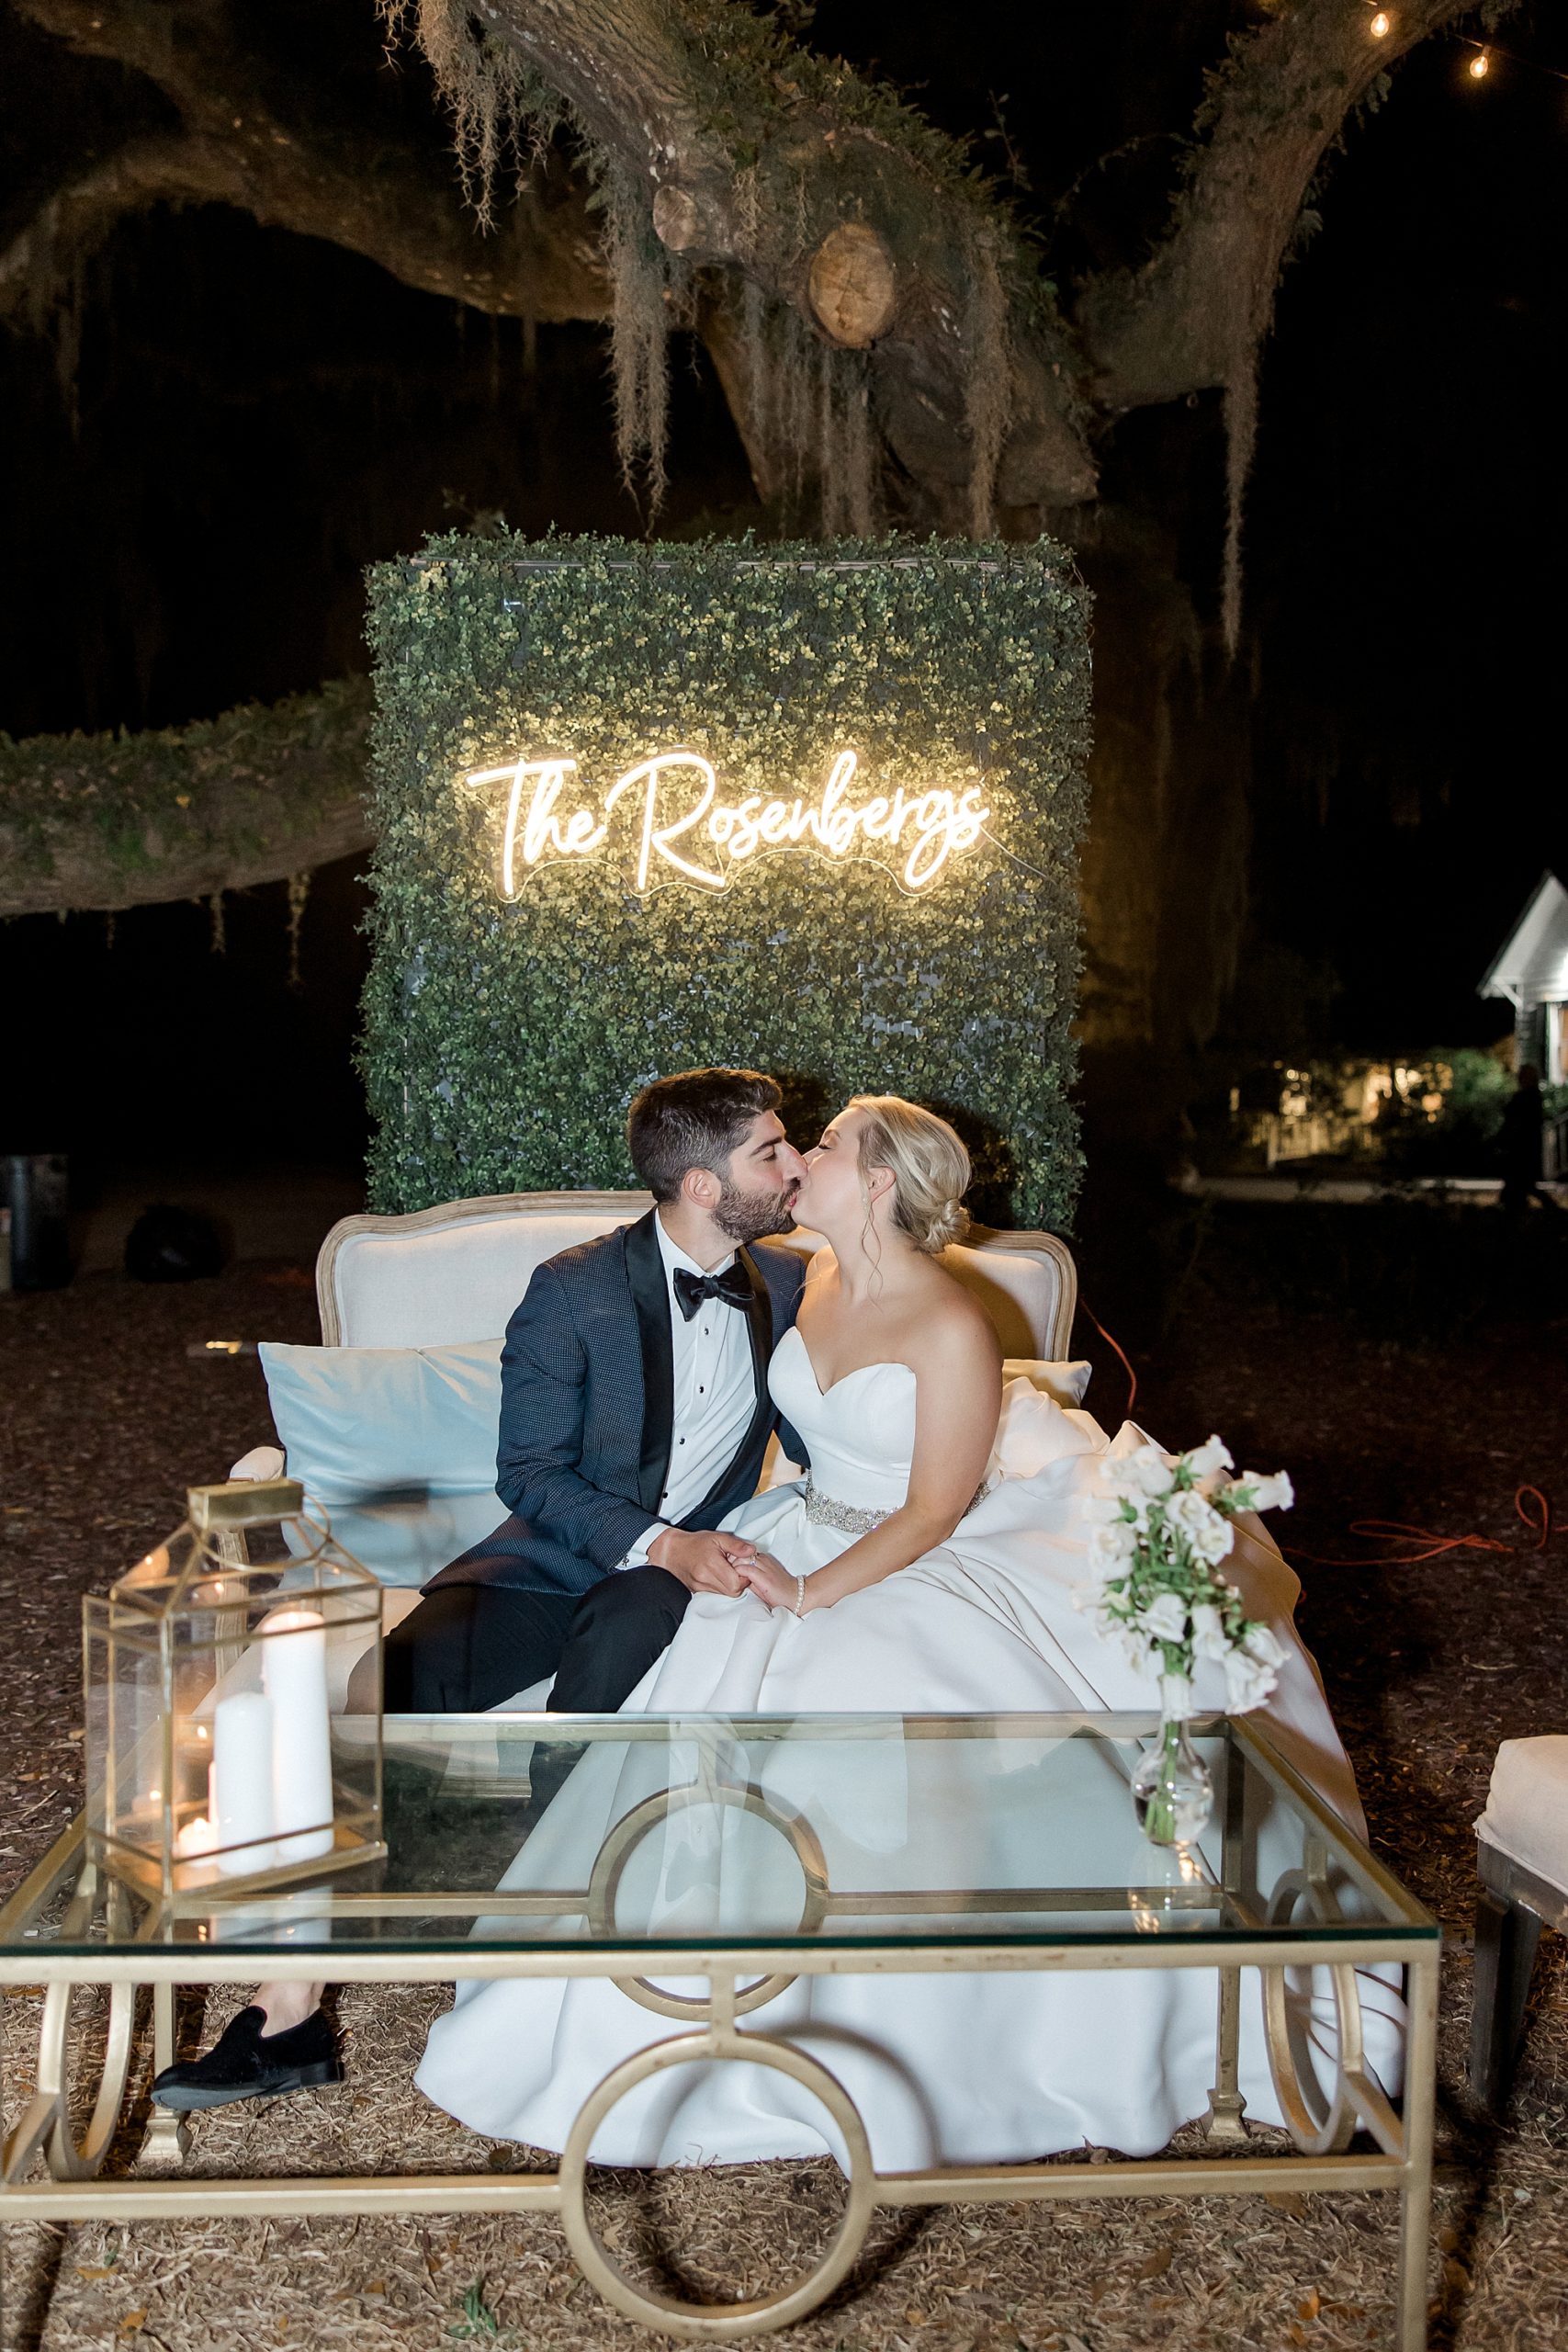 newlyweds kiss by neon wedding sign